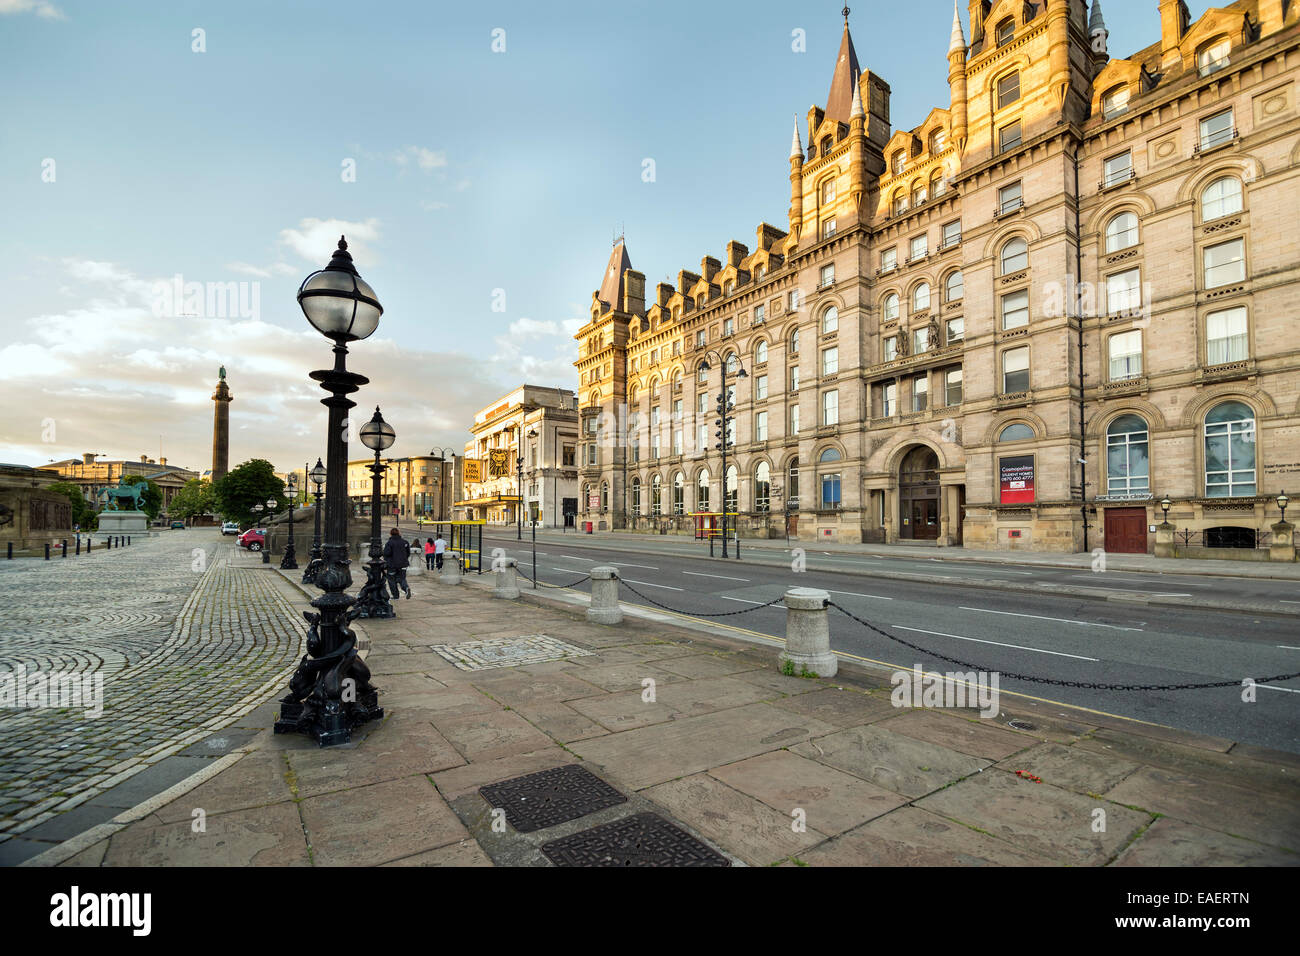 LIVERPOOL, UNITED KINGDOM - JUNE 8, 2014: The former North Western Hotel is on the east side of Lime Street, Liverpool, England. Stock Photo